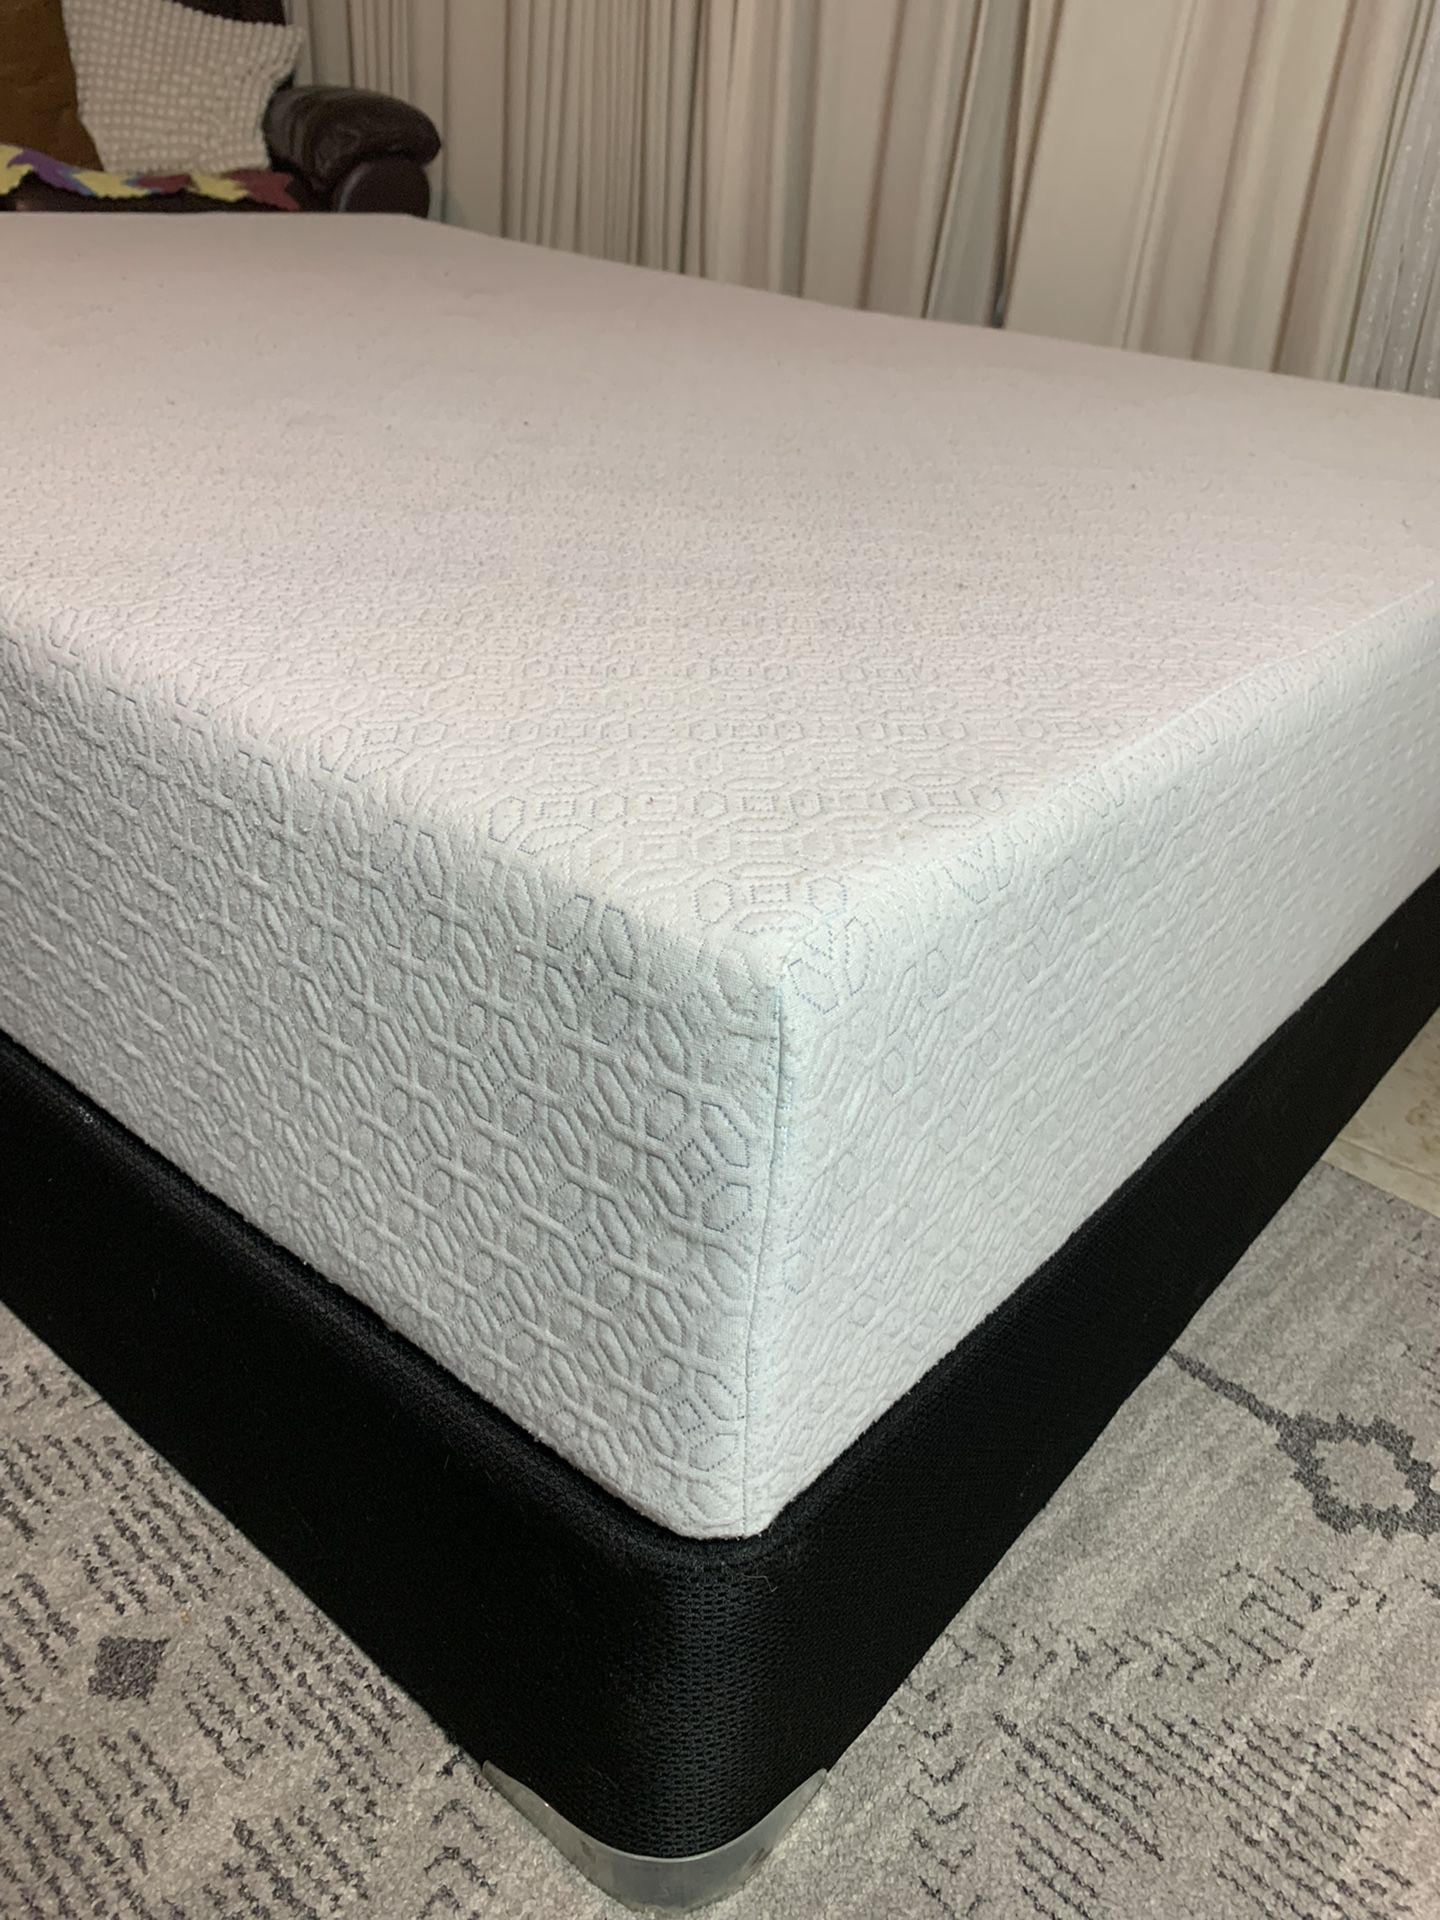 Memory Foam queen mattress and box spring ,it’s very good condition ,it’s very clean ,is very thick 